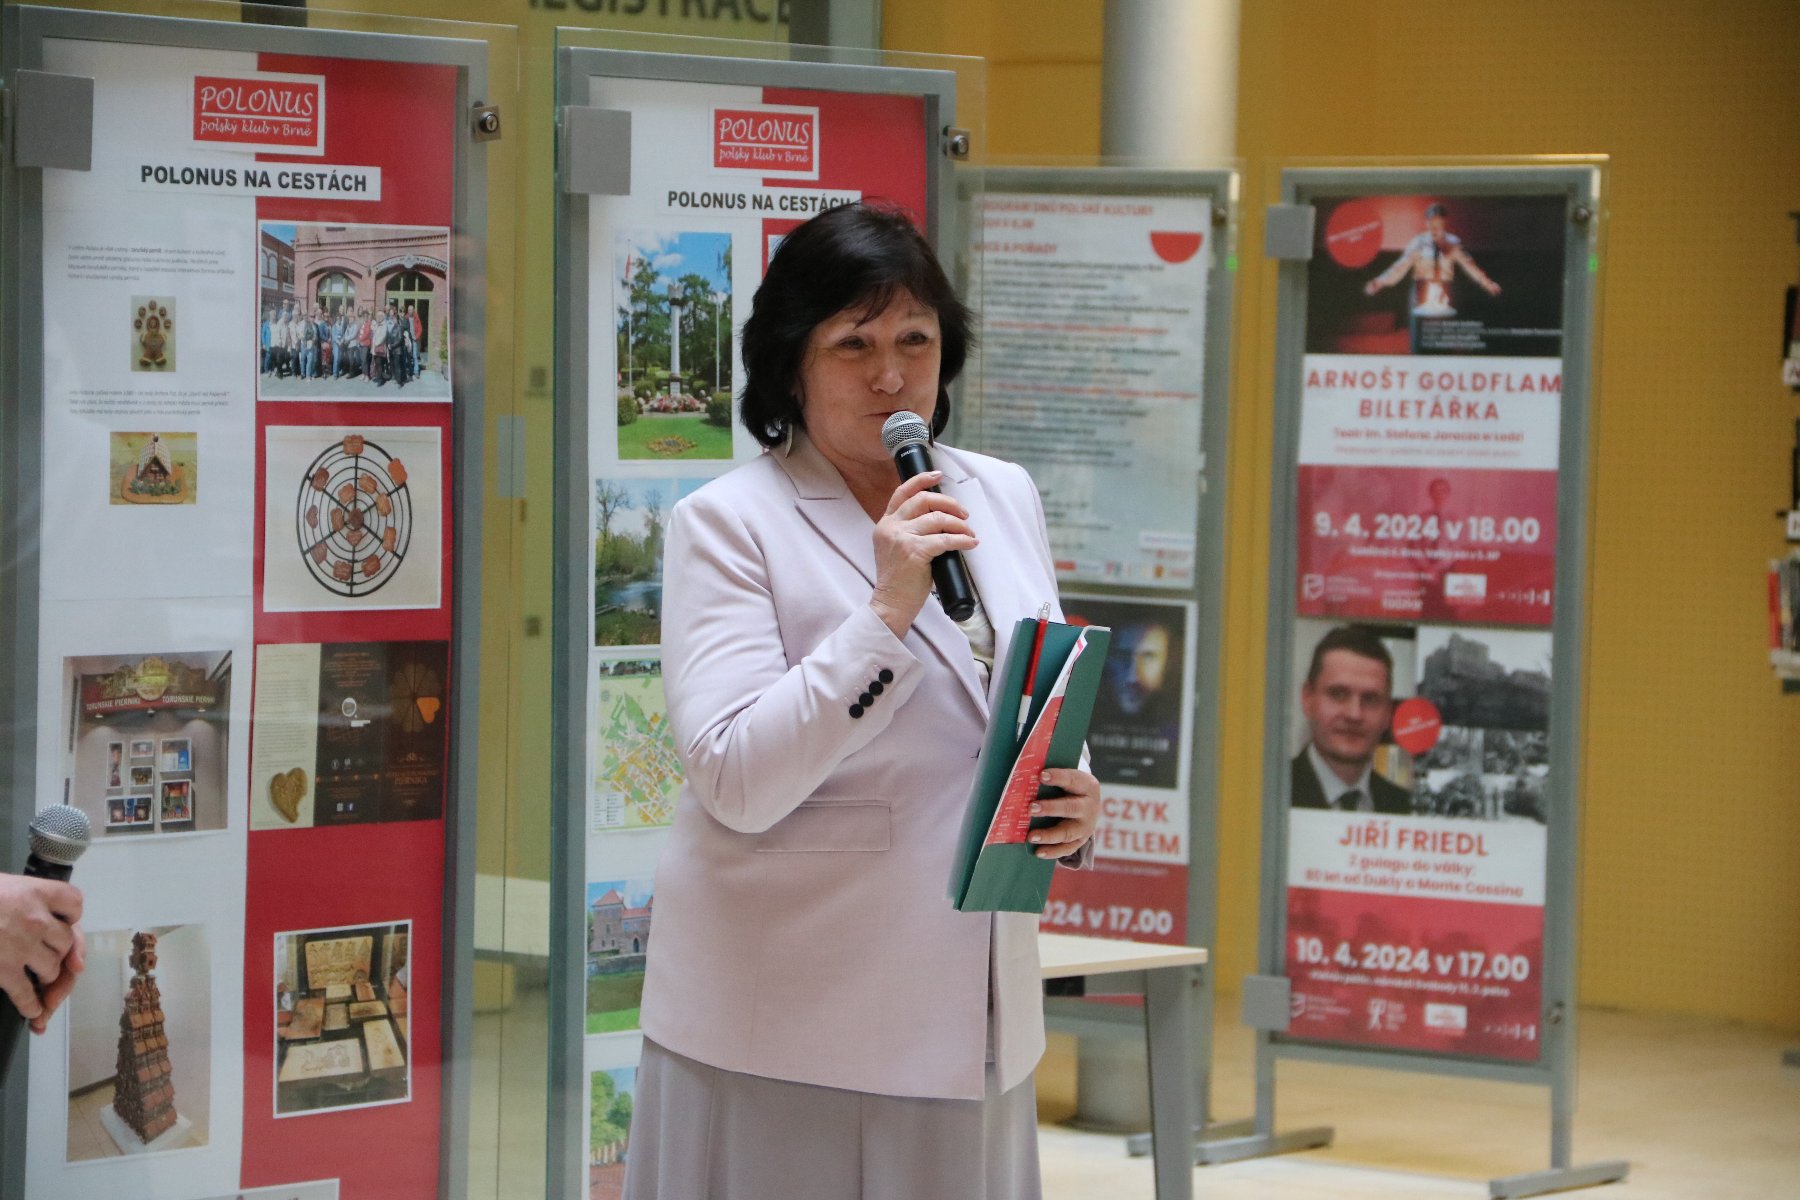 The photo shows a lady who is speaking - grafika artykułu